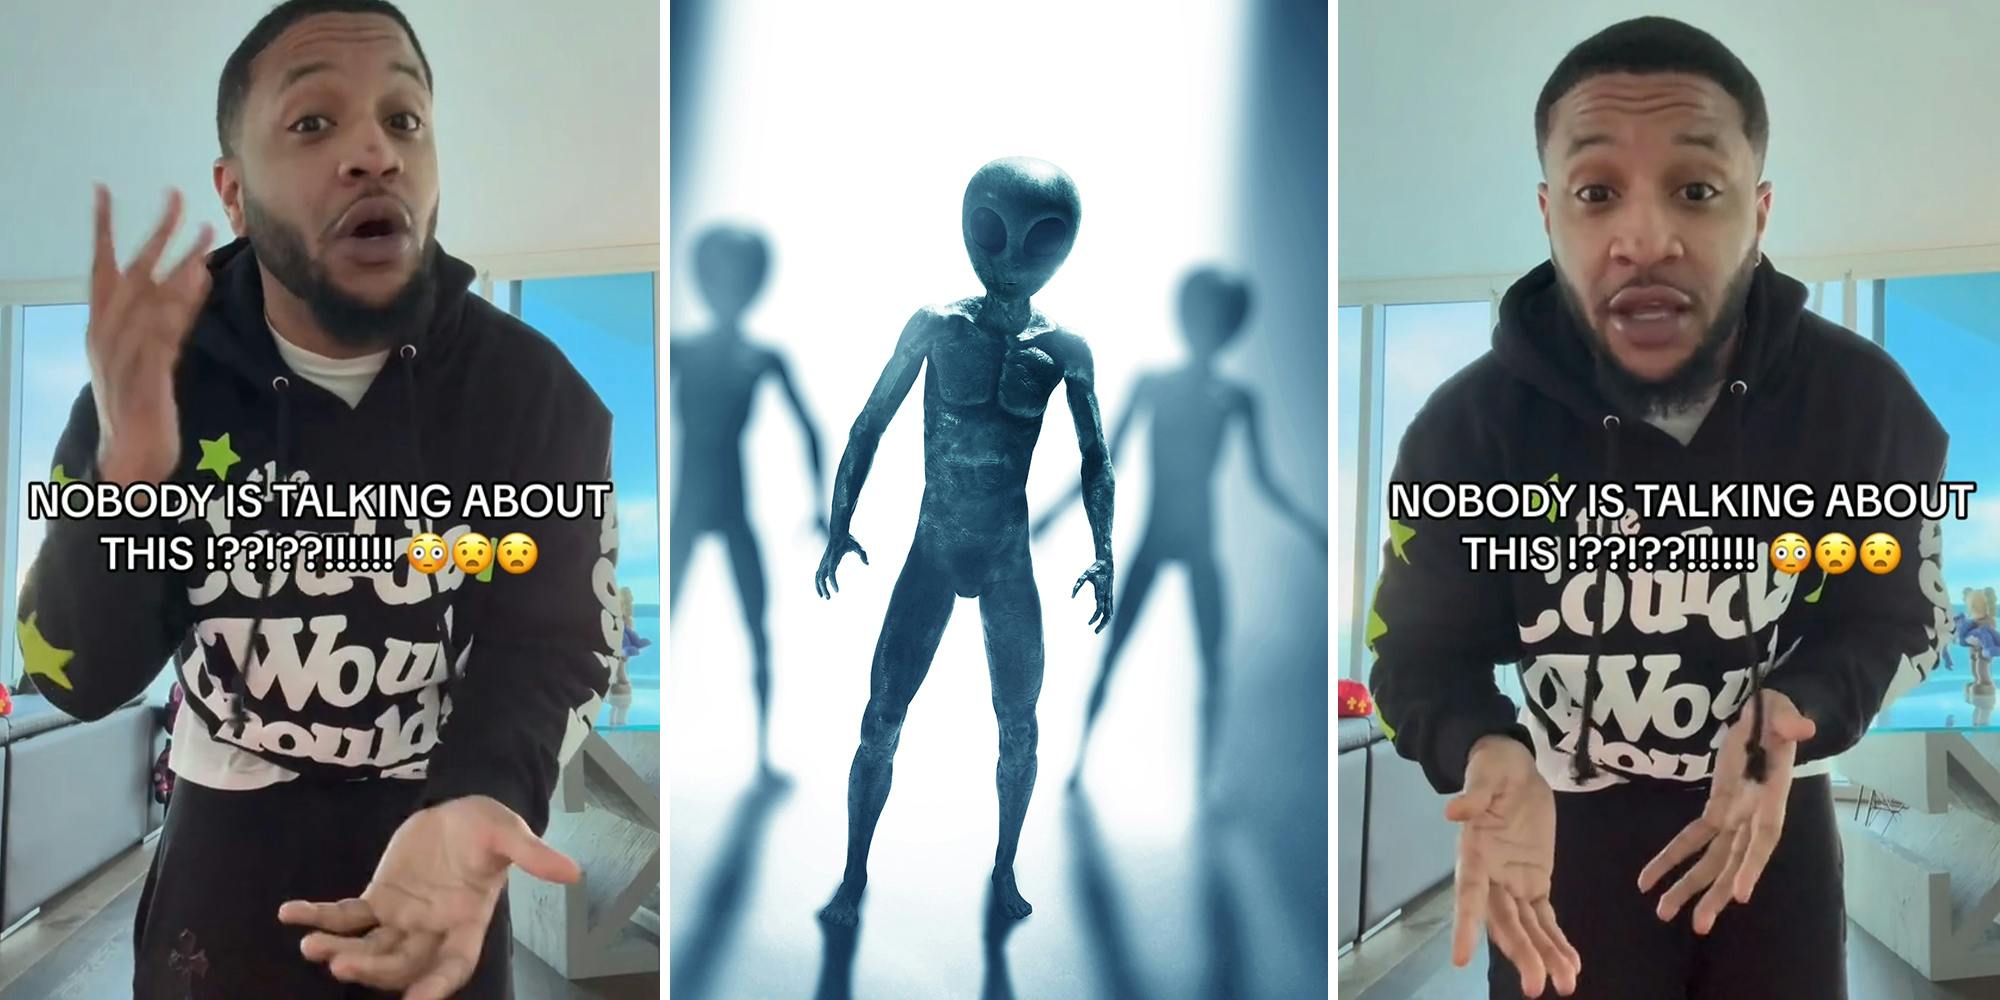 Miami artist says aliens were teleporting and shape-shifting, accuses police of deleting phone pics